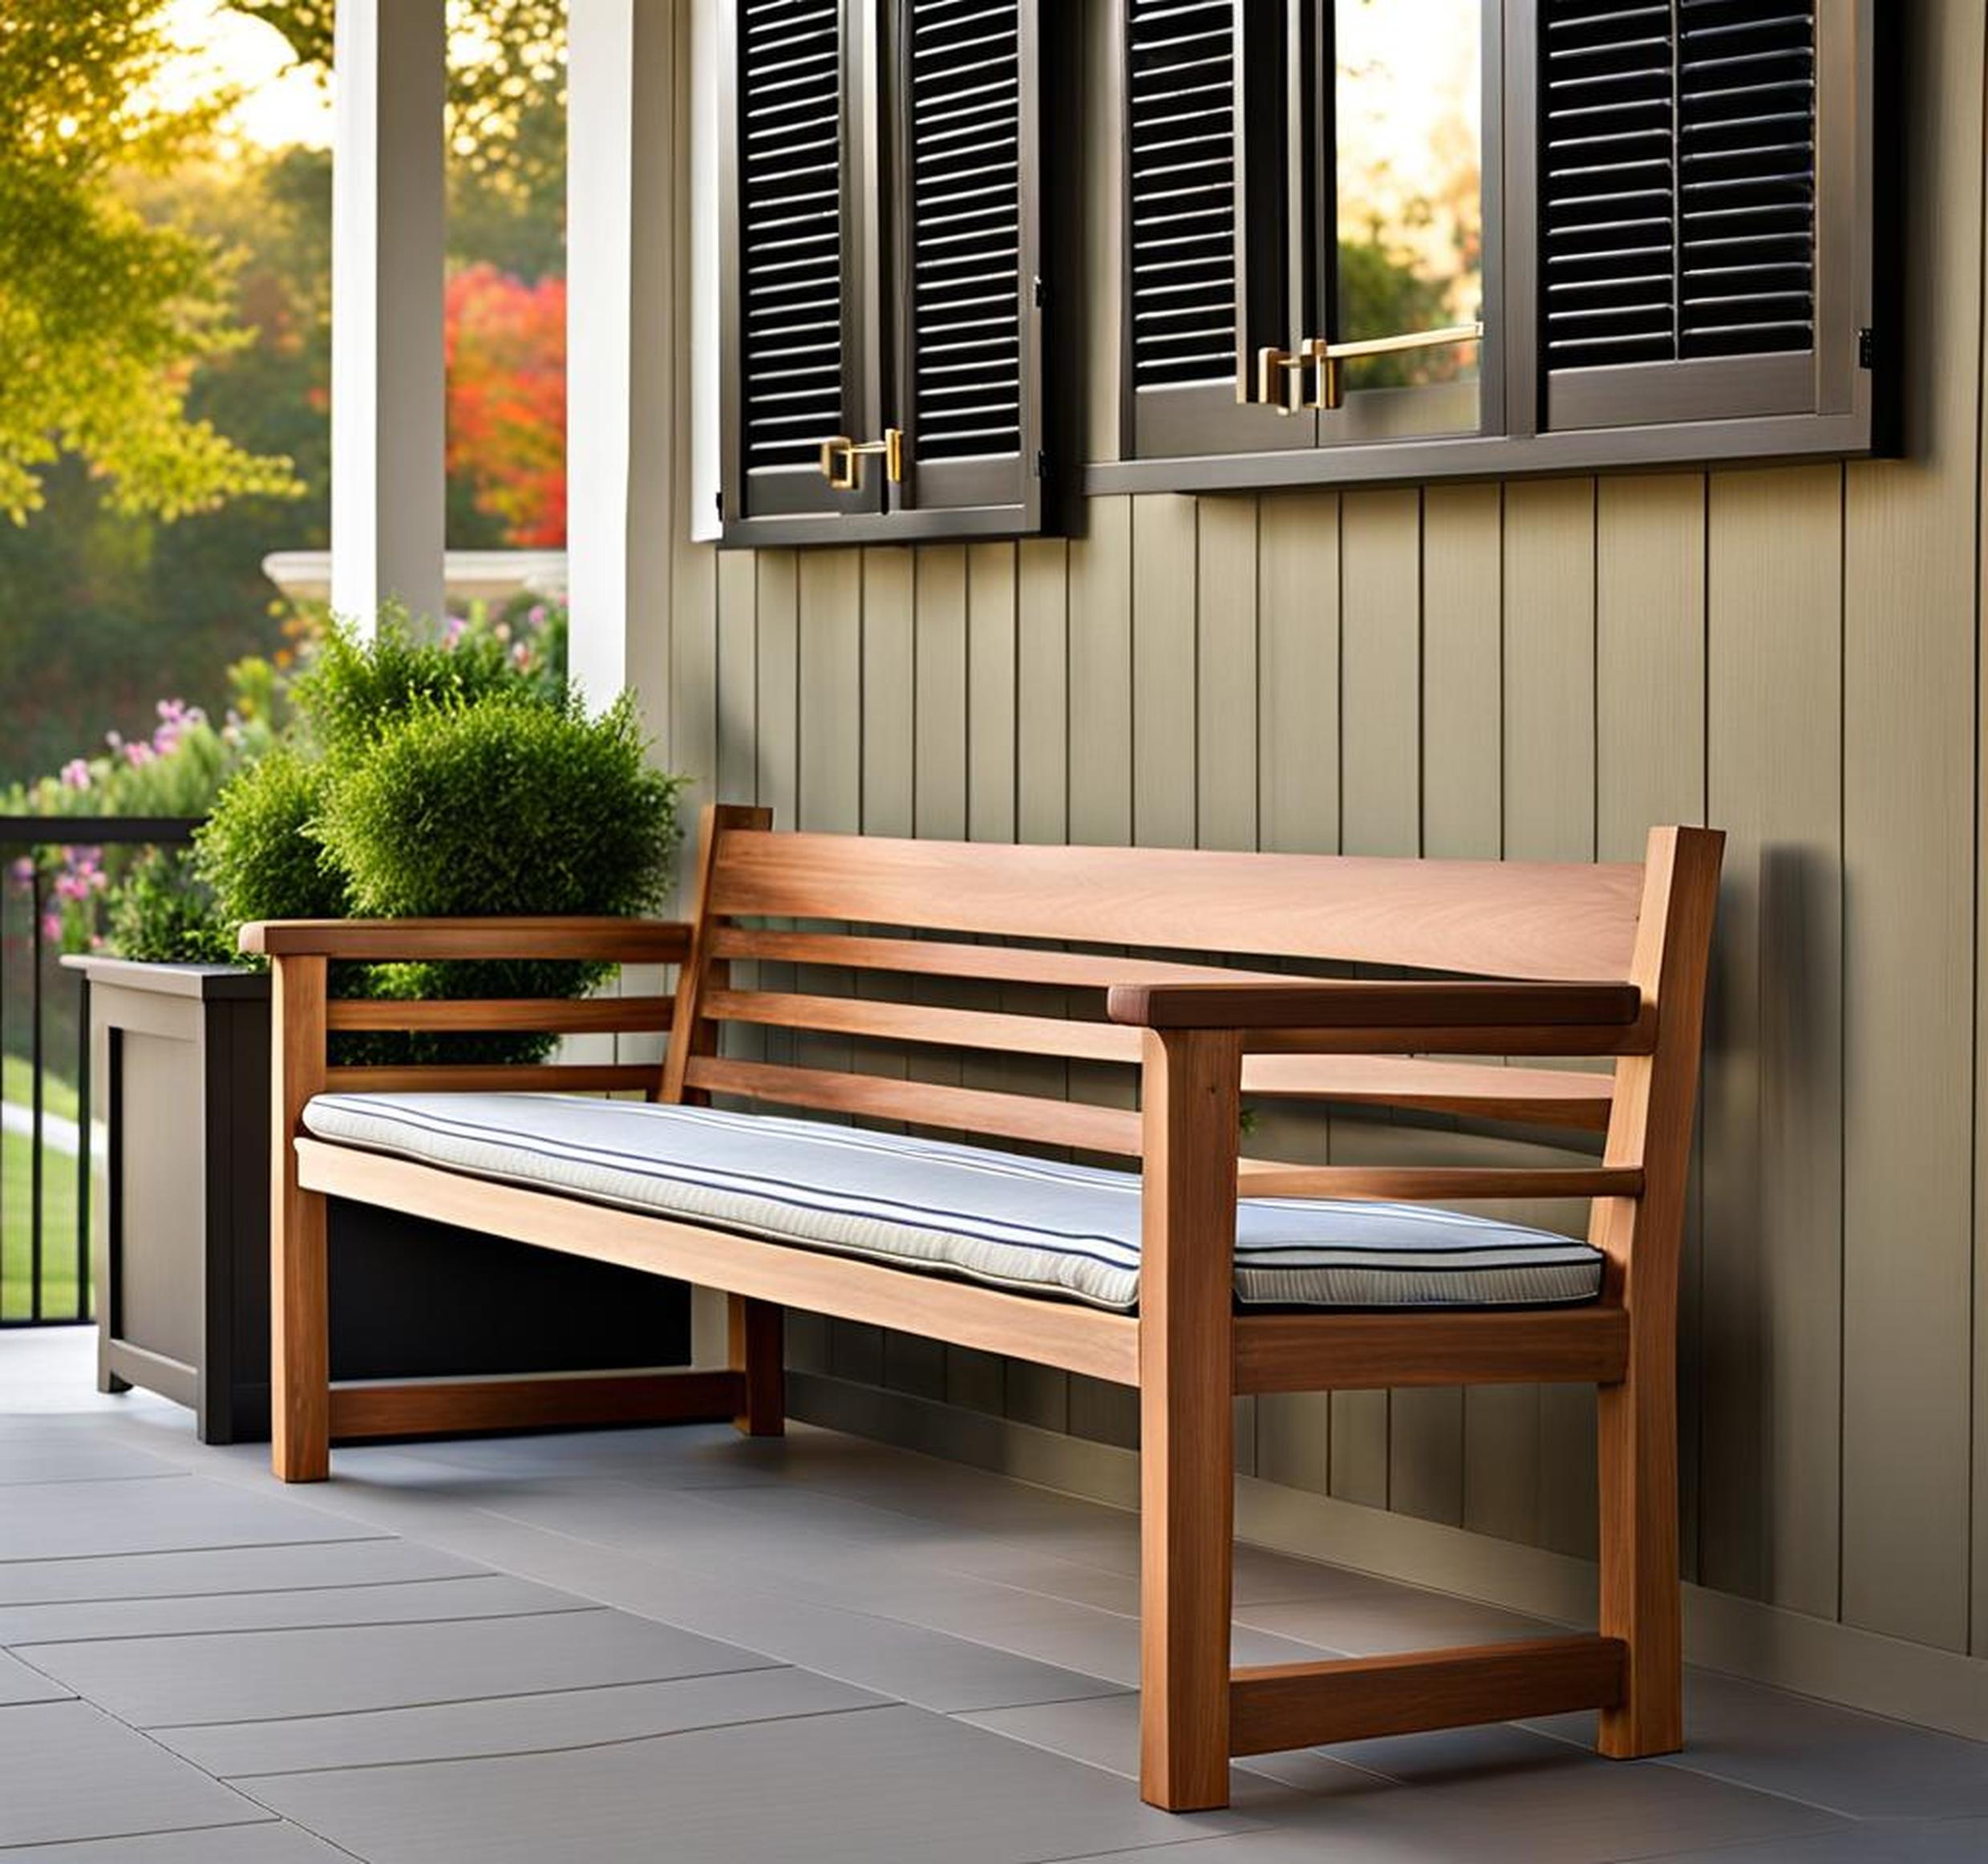 front porch bench ideas